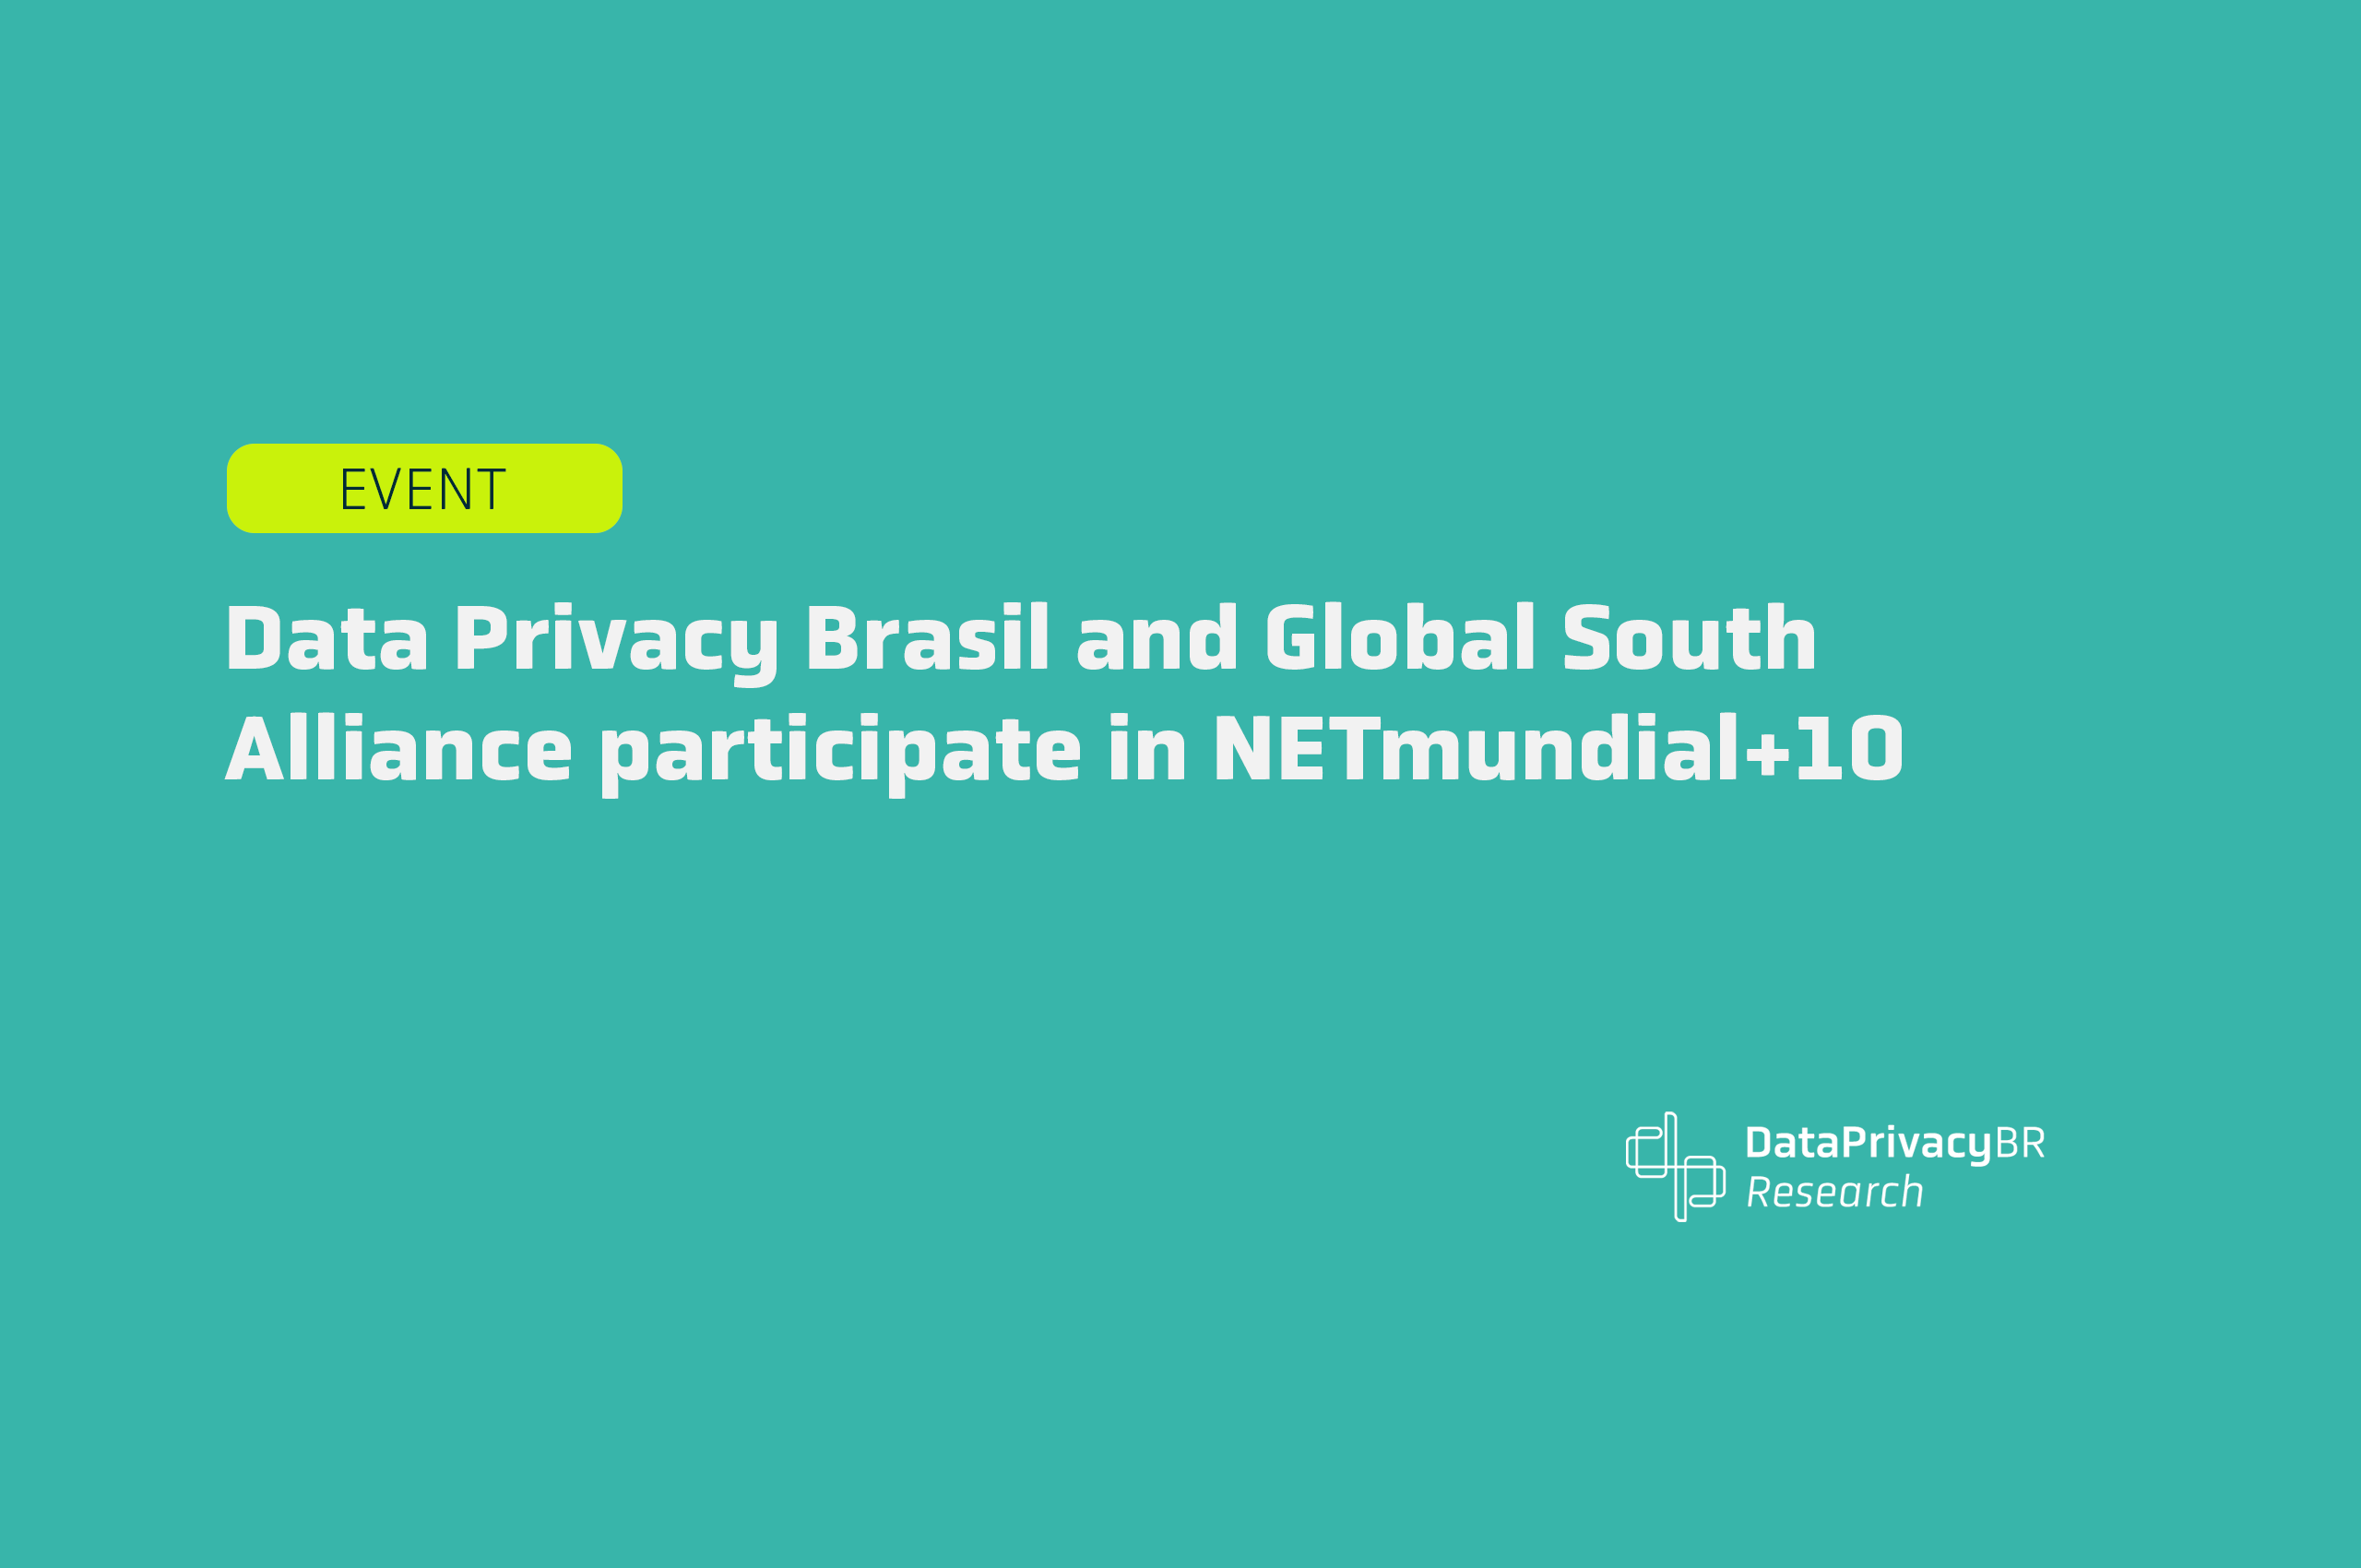 http://Data%20Privacy%20Brasil%20and%20Global%20South%20Alliance%20participate%20in%20NETmundial+10